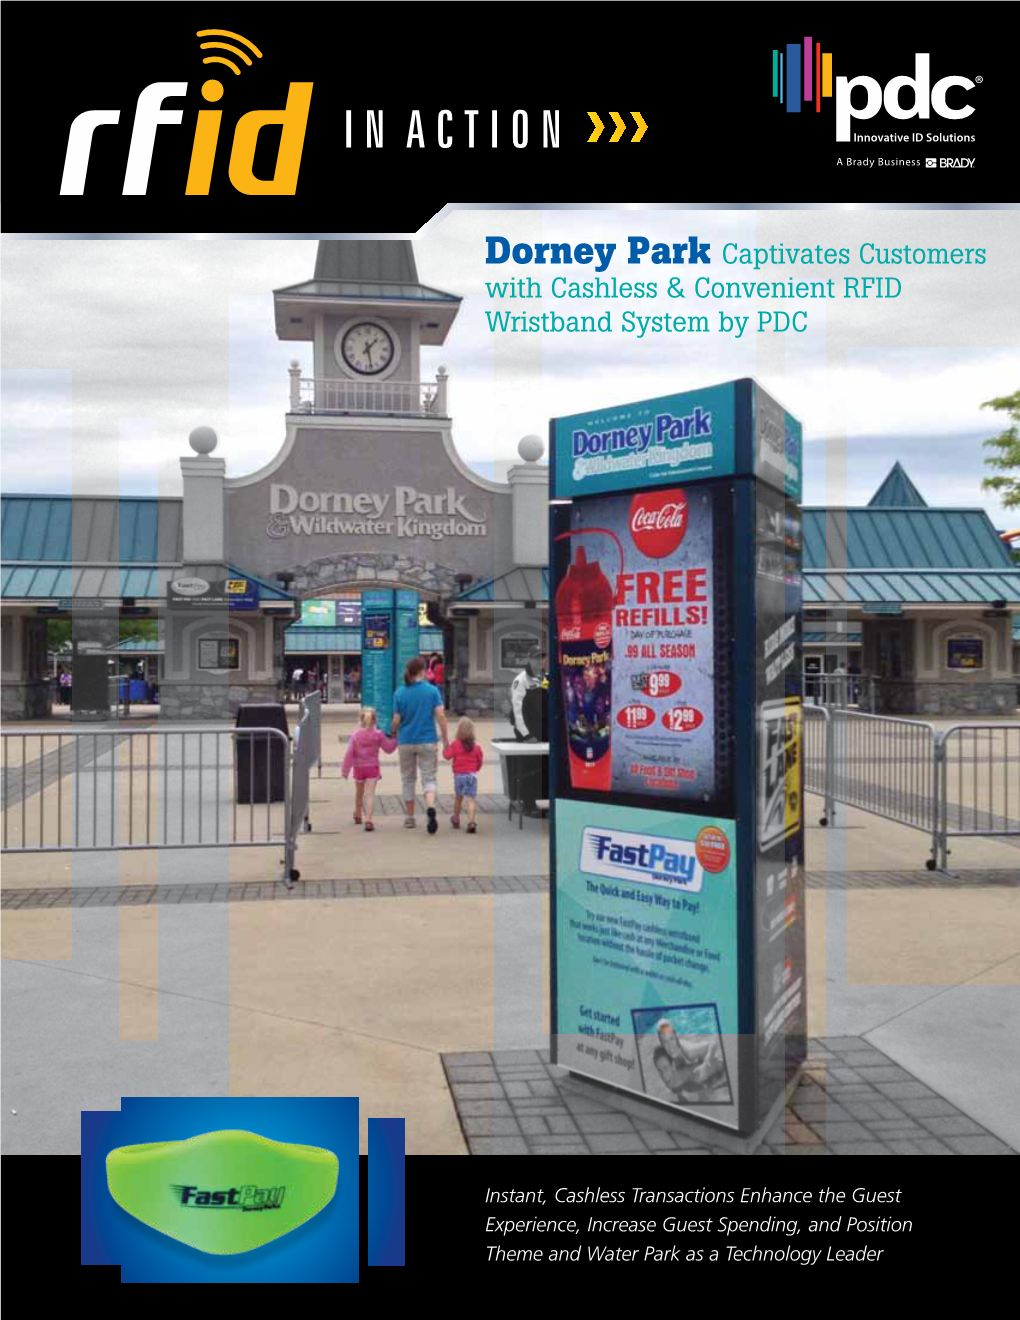 Dorney Park Captivates Customers with Cashless & Convenient RFID Wristband System by PDC